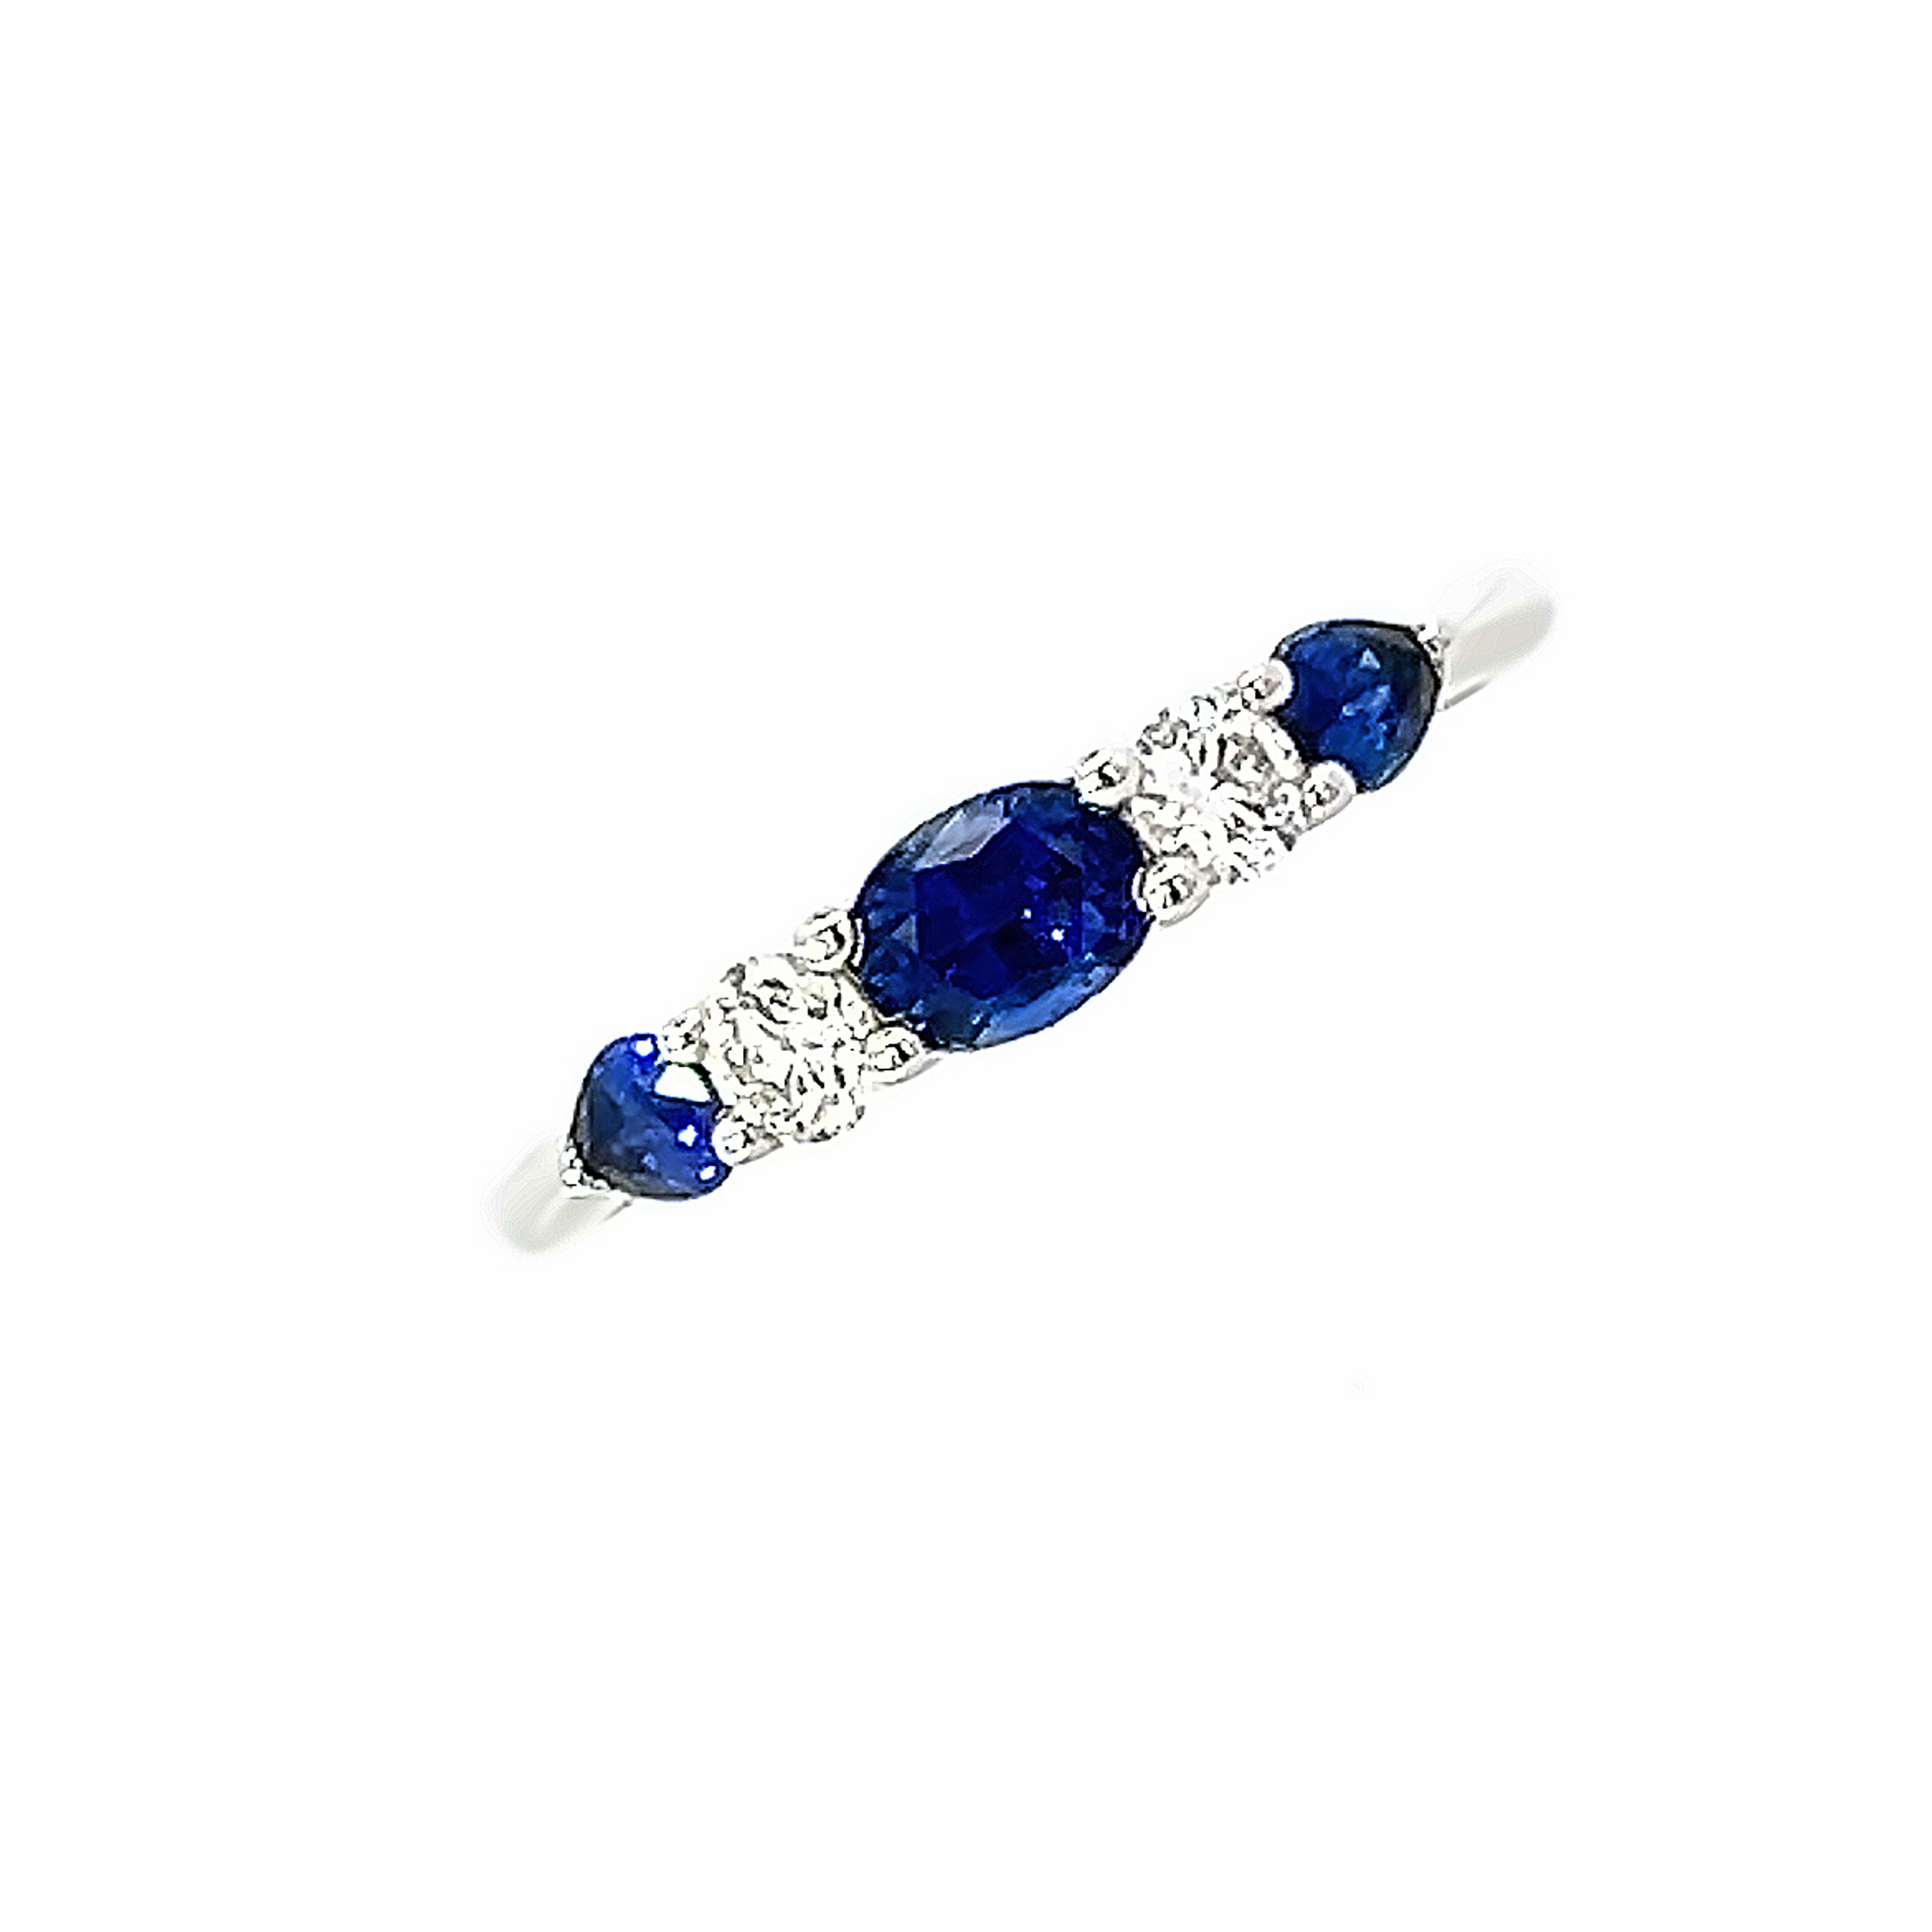 An 18 Carat White Gold five stone Diamond and Sapphire Ring